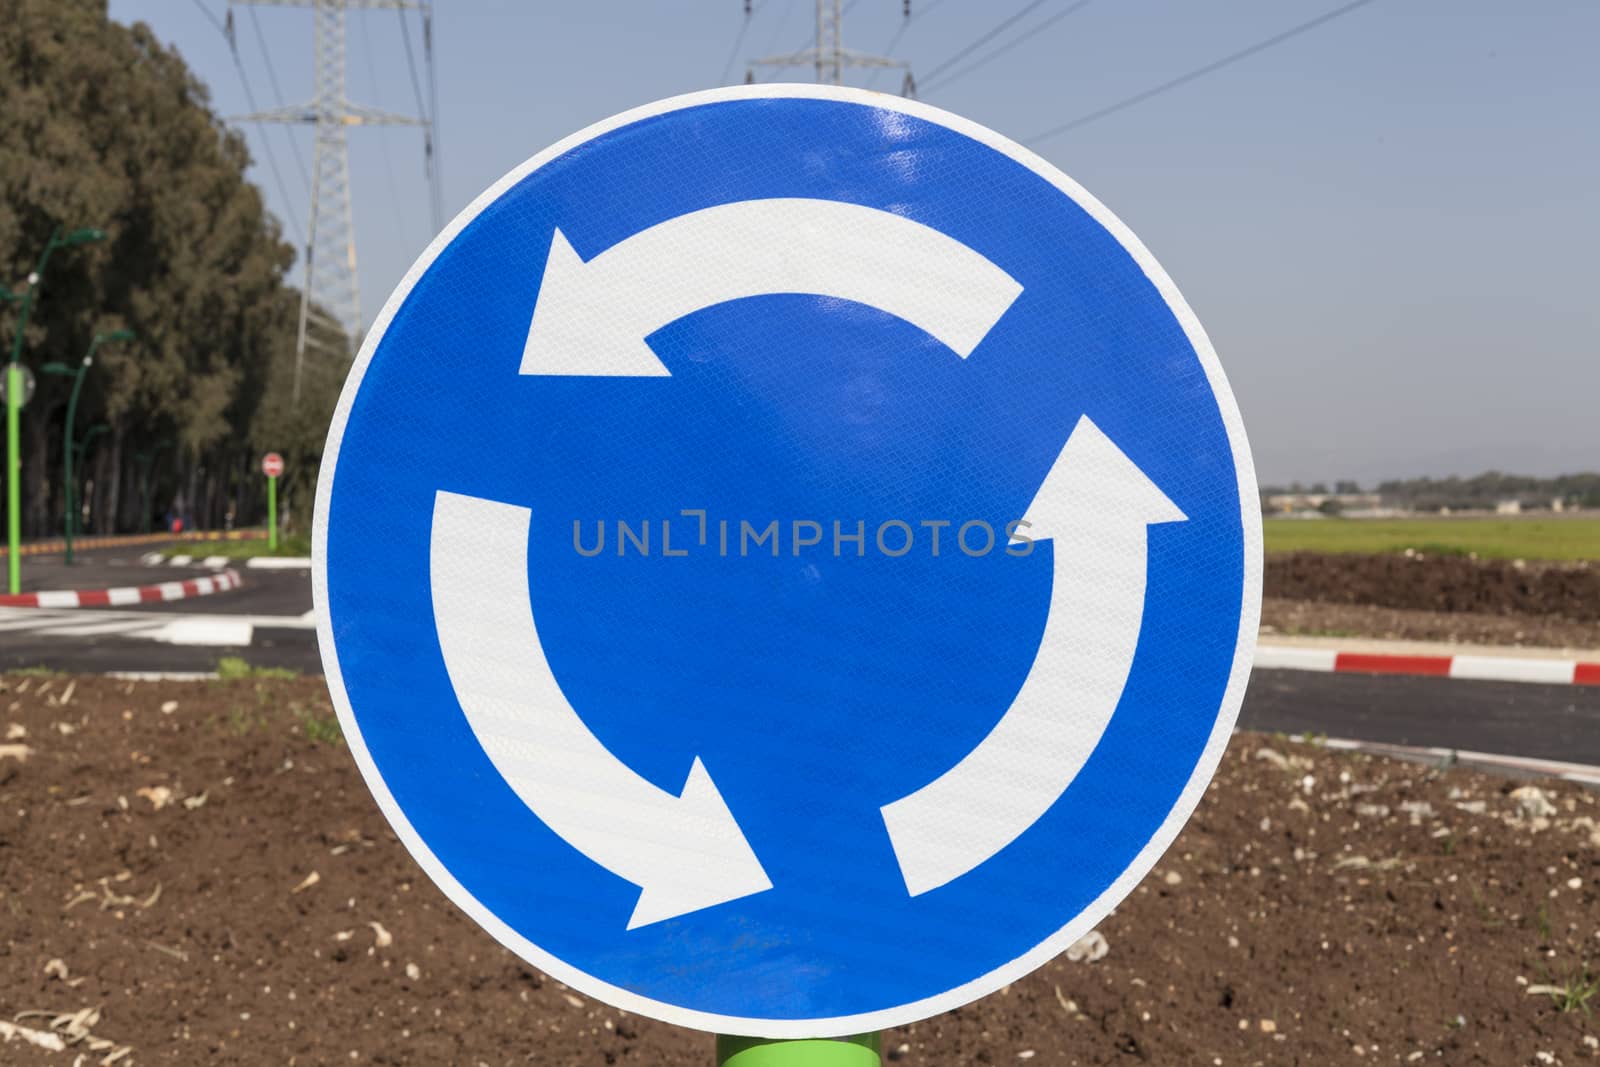 Roundabout blue traffic sign with background